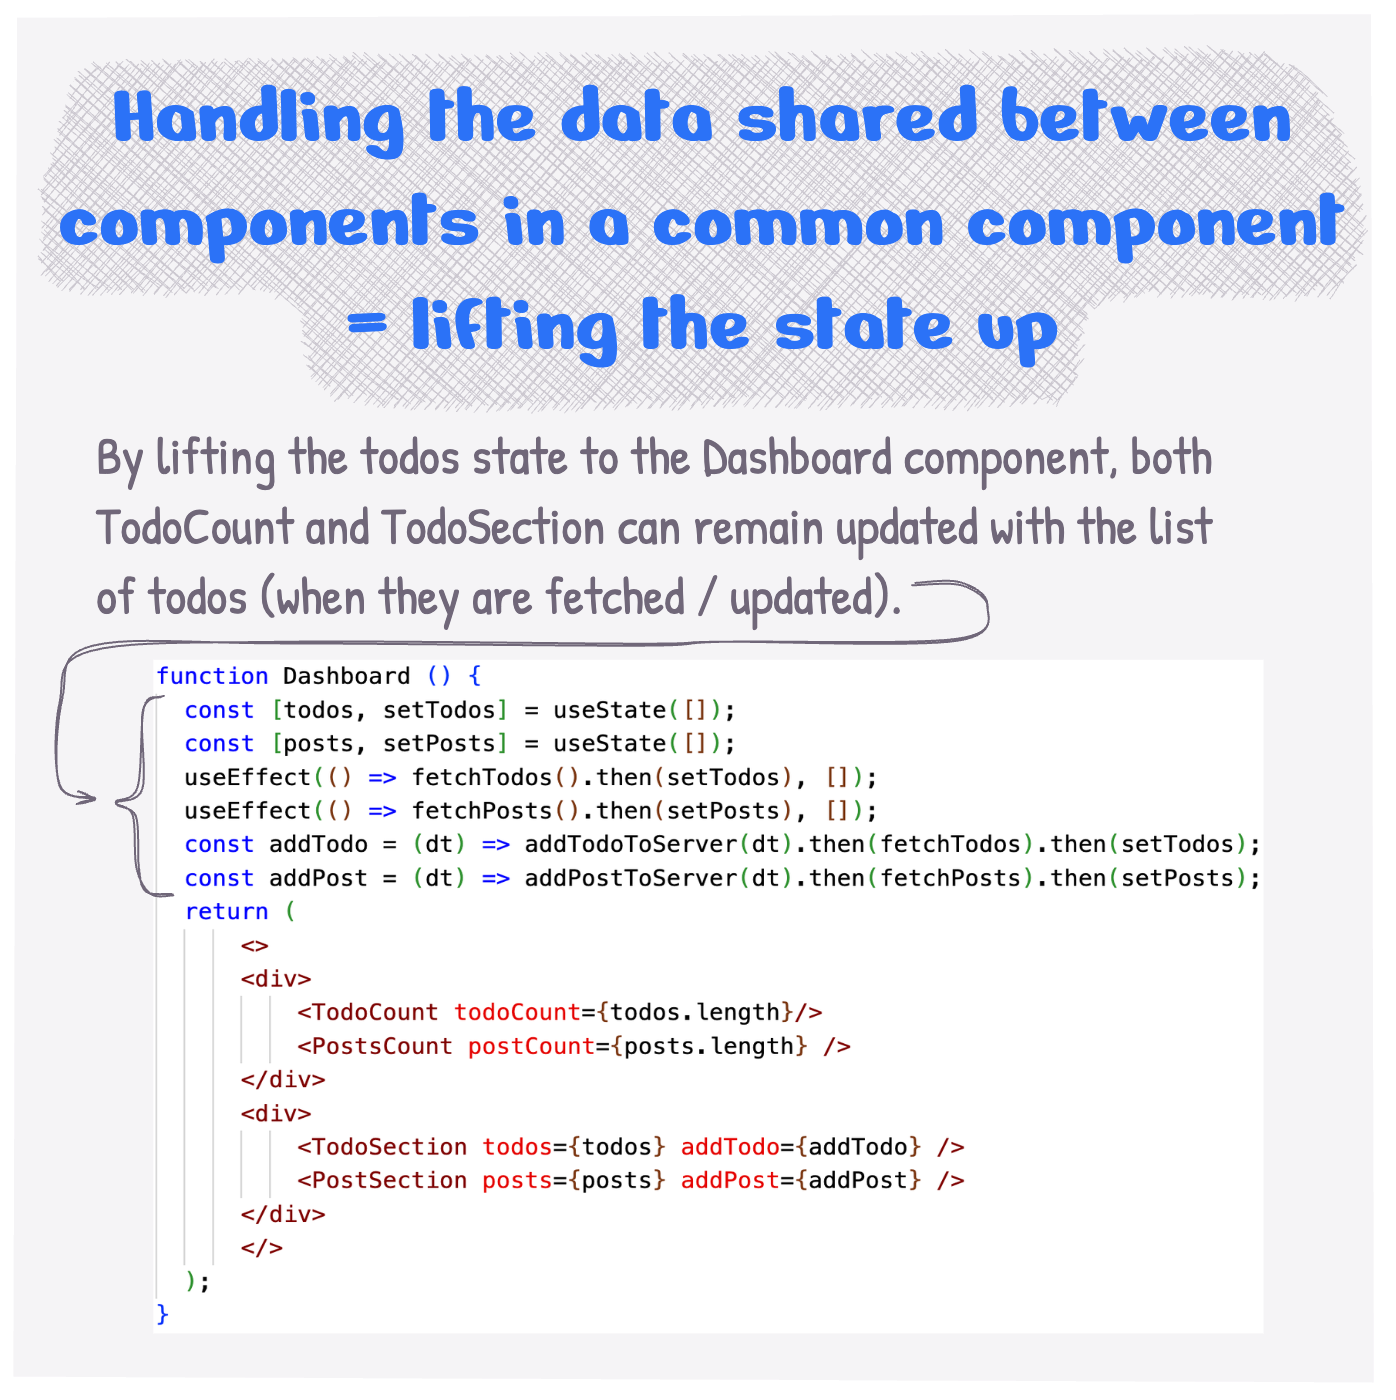 Handling the data shared between the components in a common component = lifting the state up.